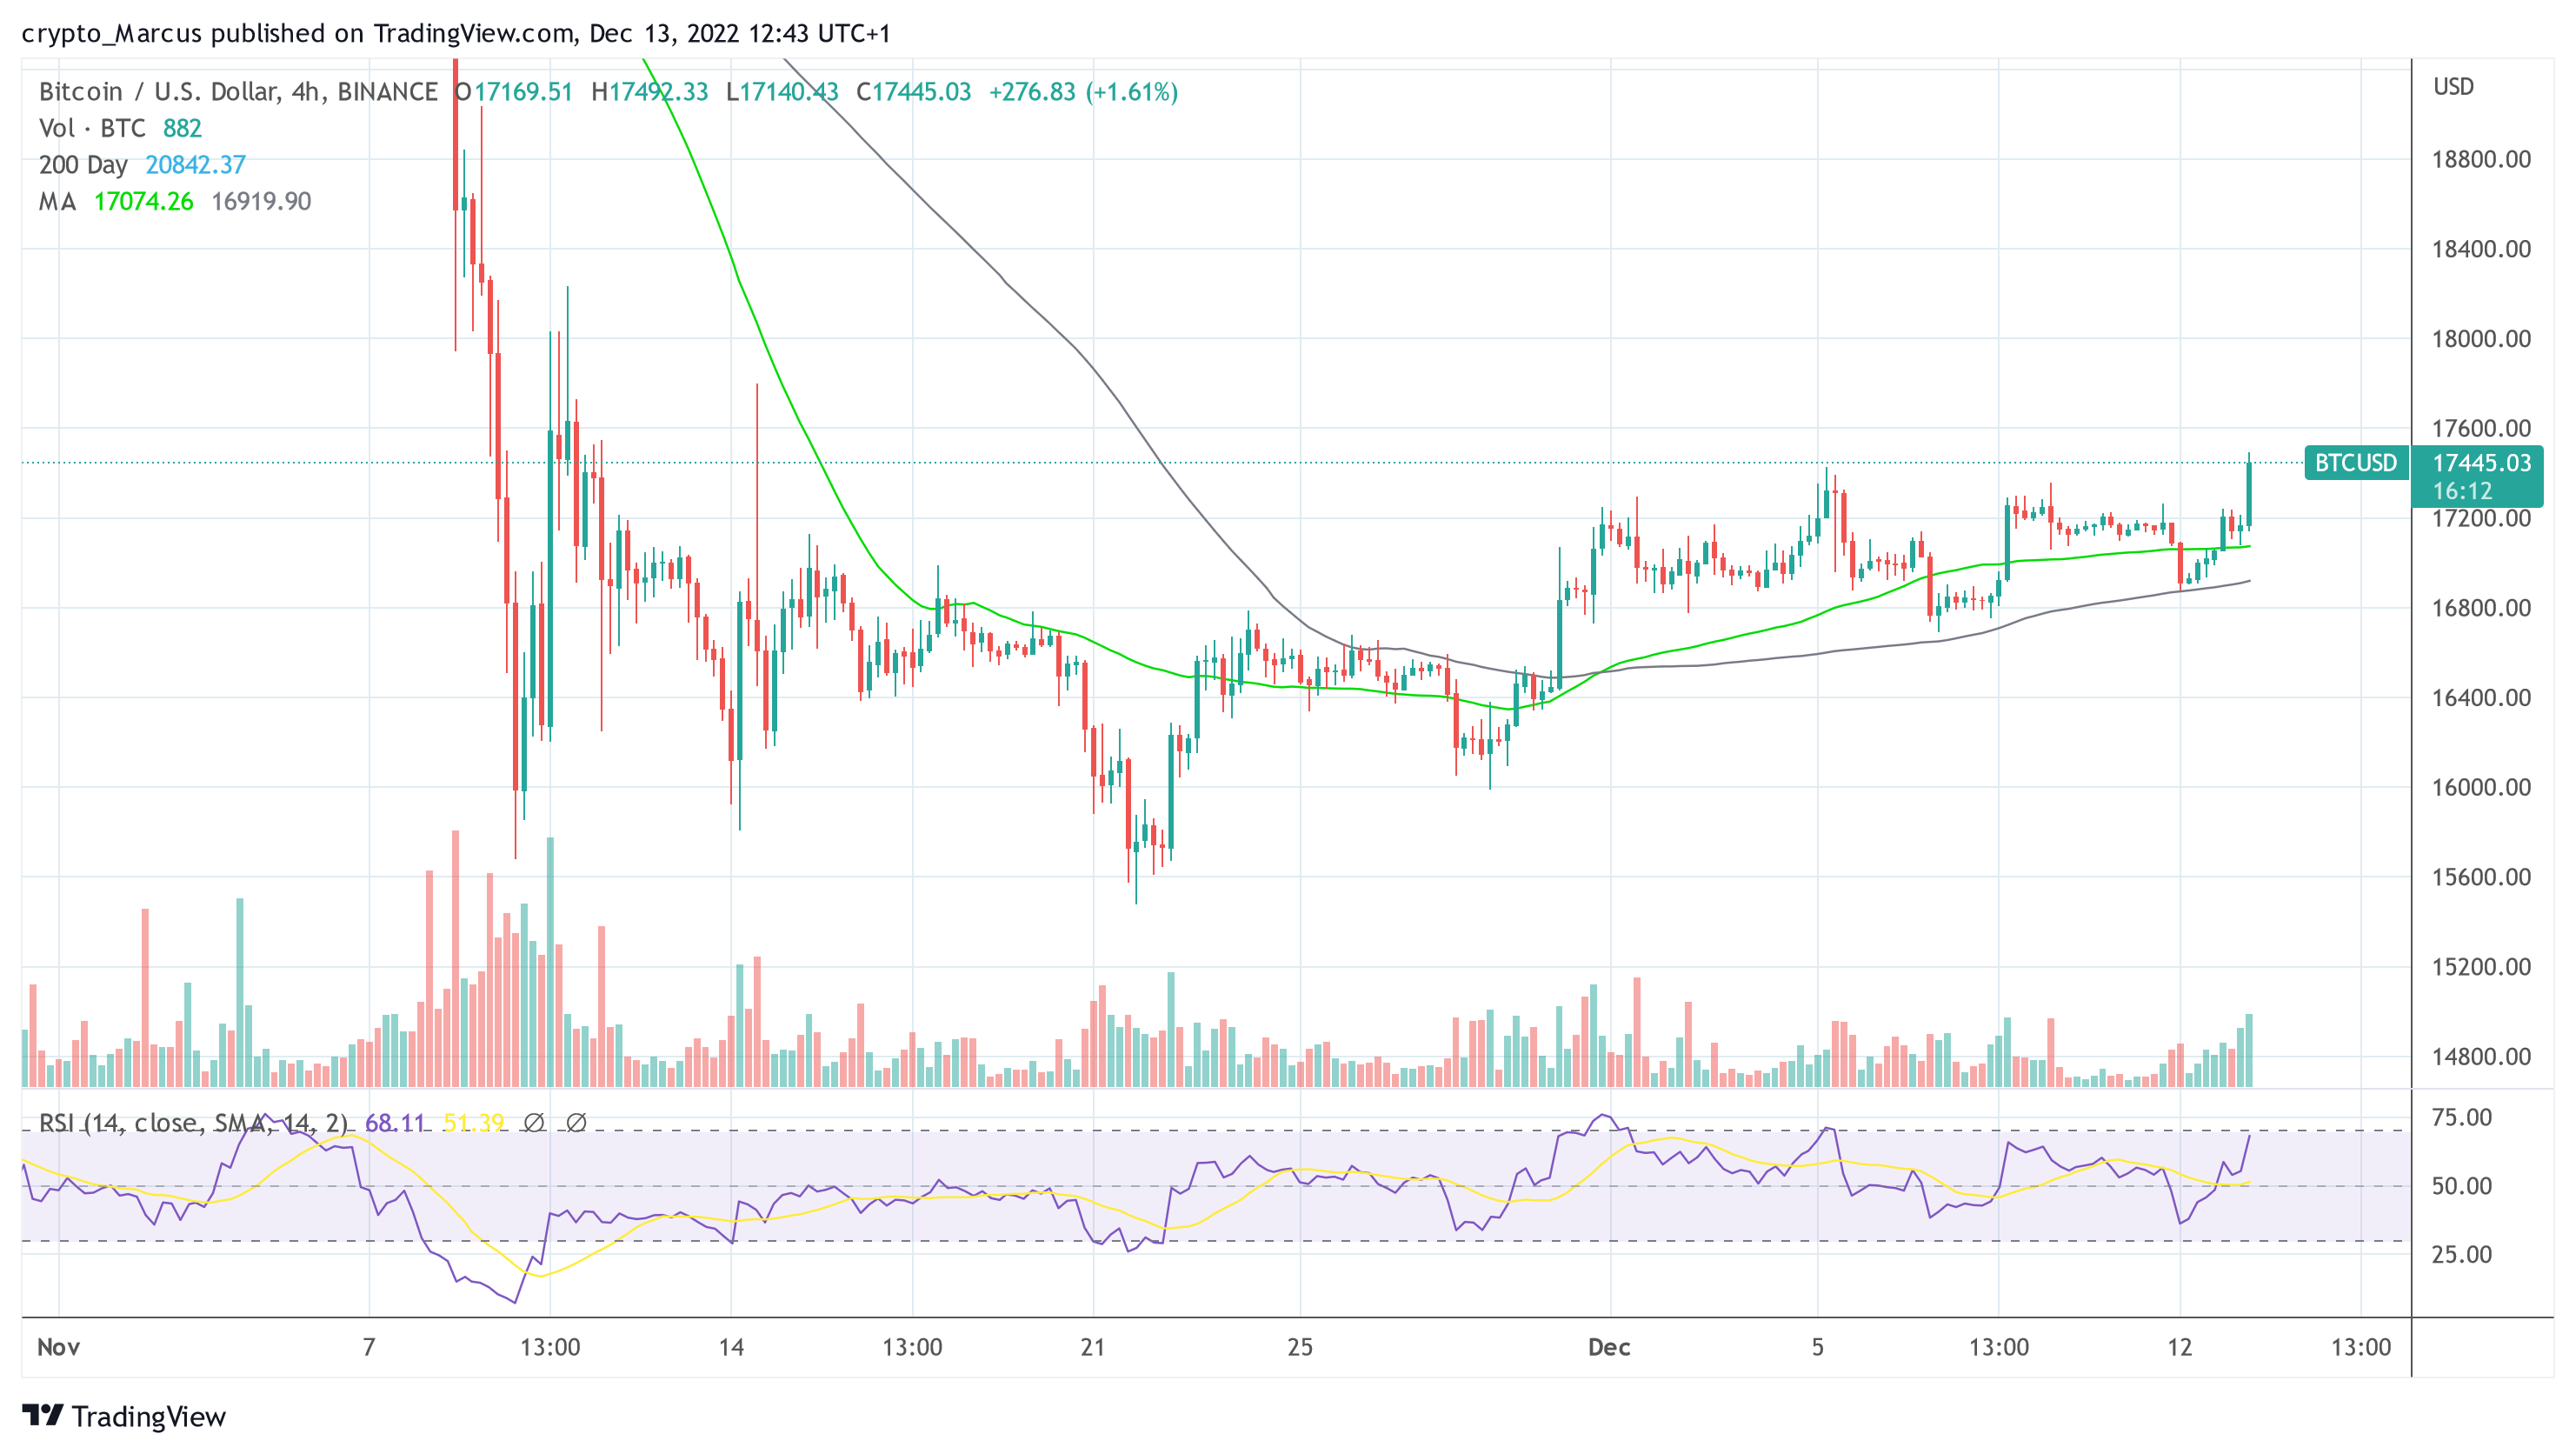 BTC Price Ahead of CPI Release and Bankman-Fried/FTX Hearings